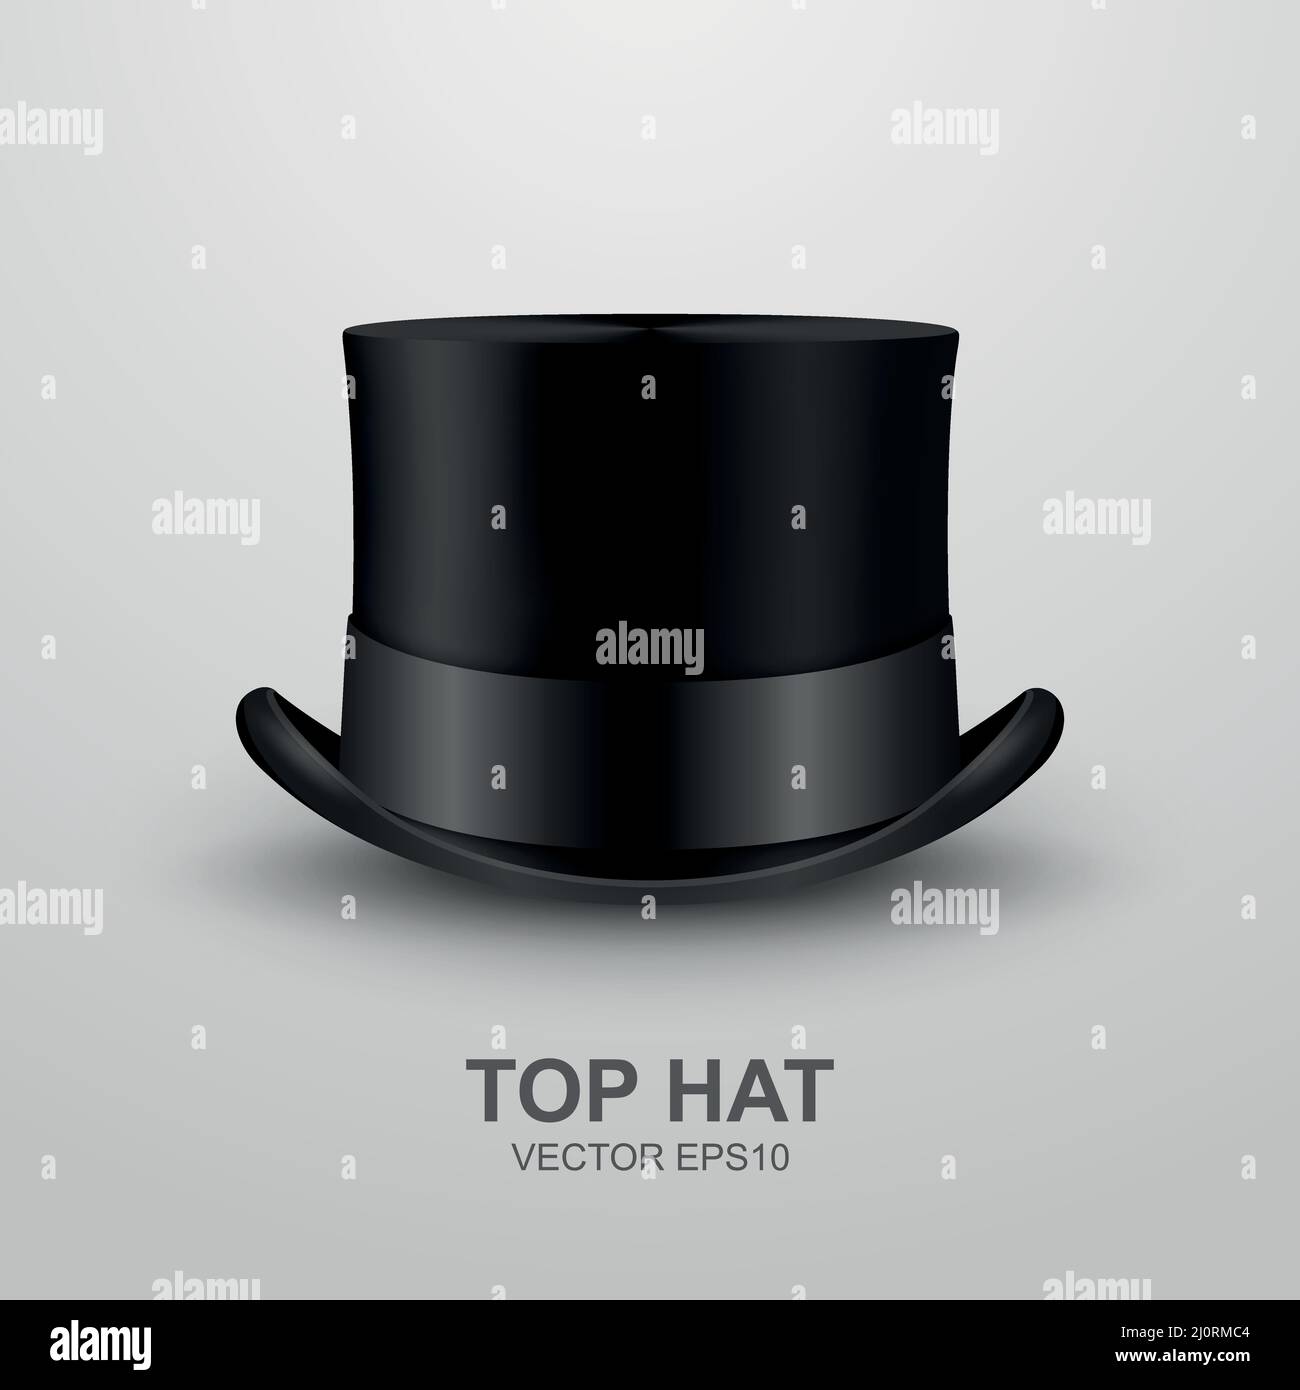 Vector 3d Realistic Retro, Vintage Black Top Hat Icon Closeup Isolated on White Background. Design Template of Top Hat, Mockup. Gentlemans Hat Icon Stock Vector